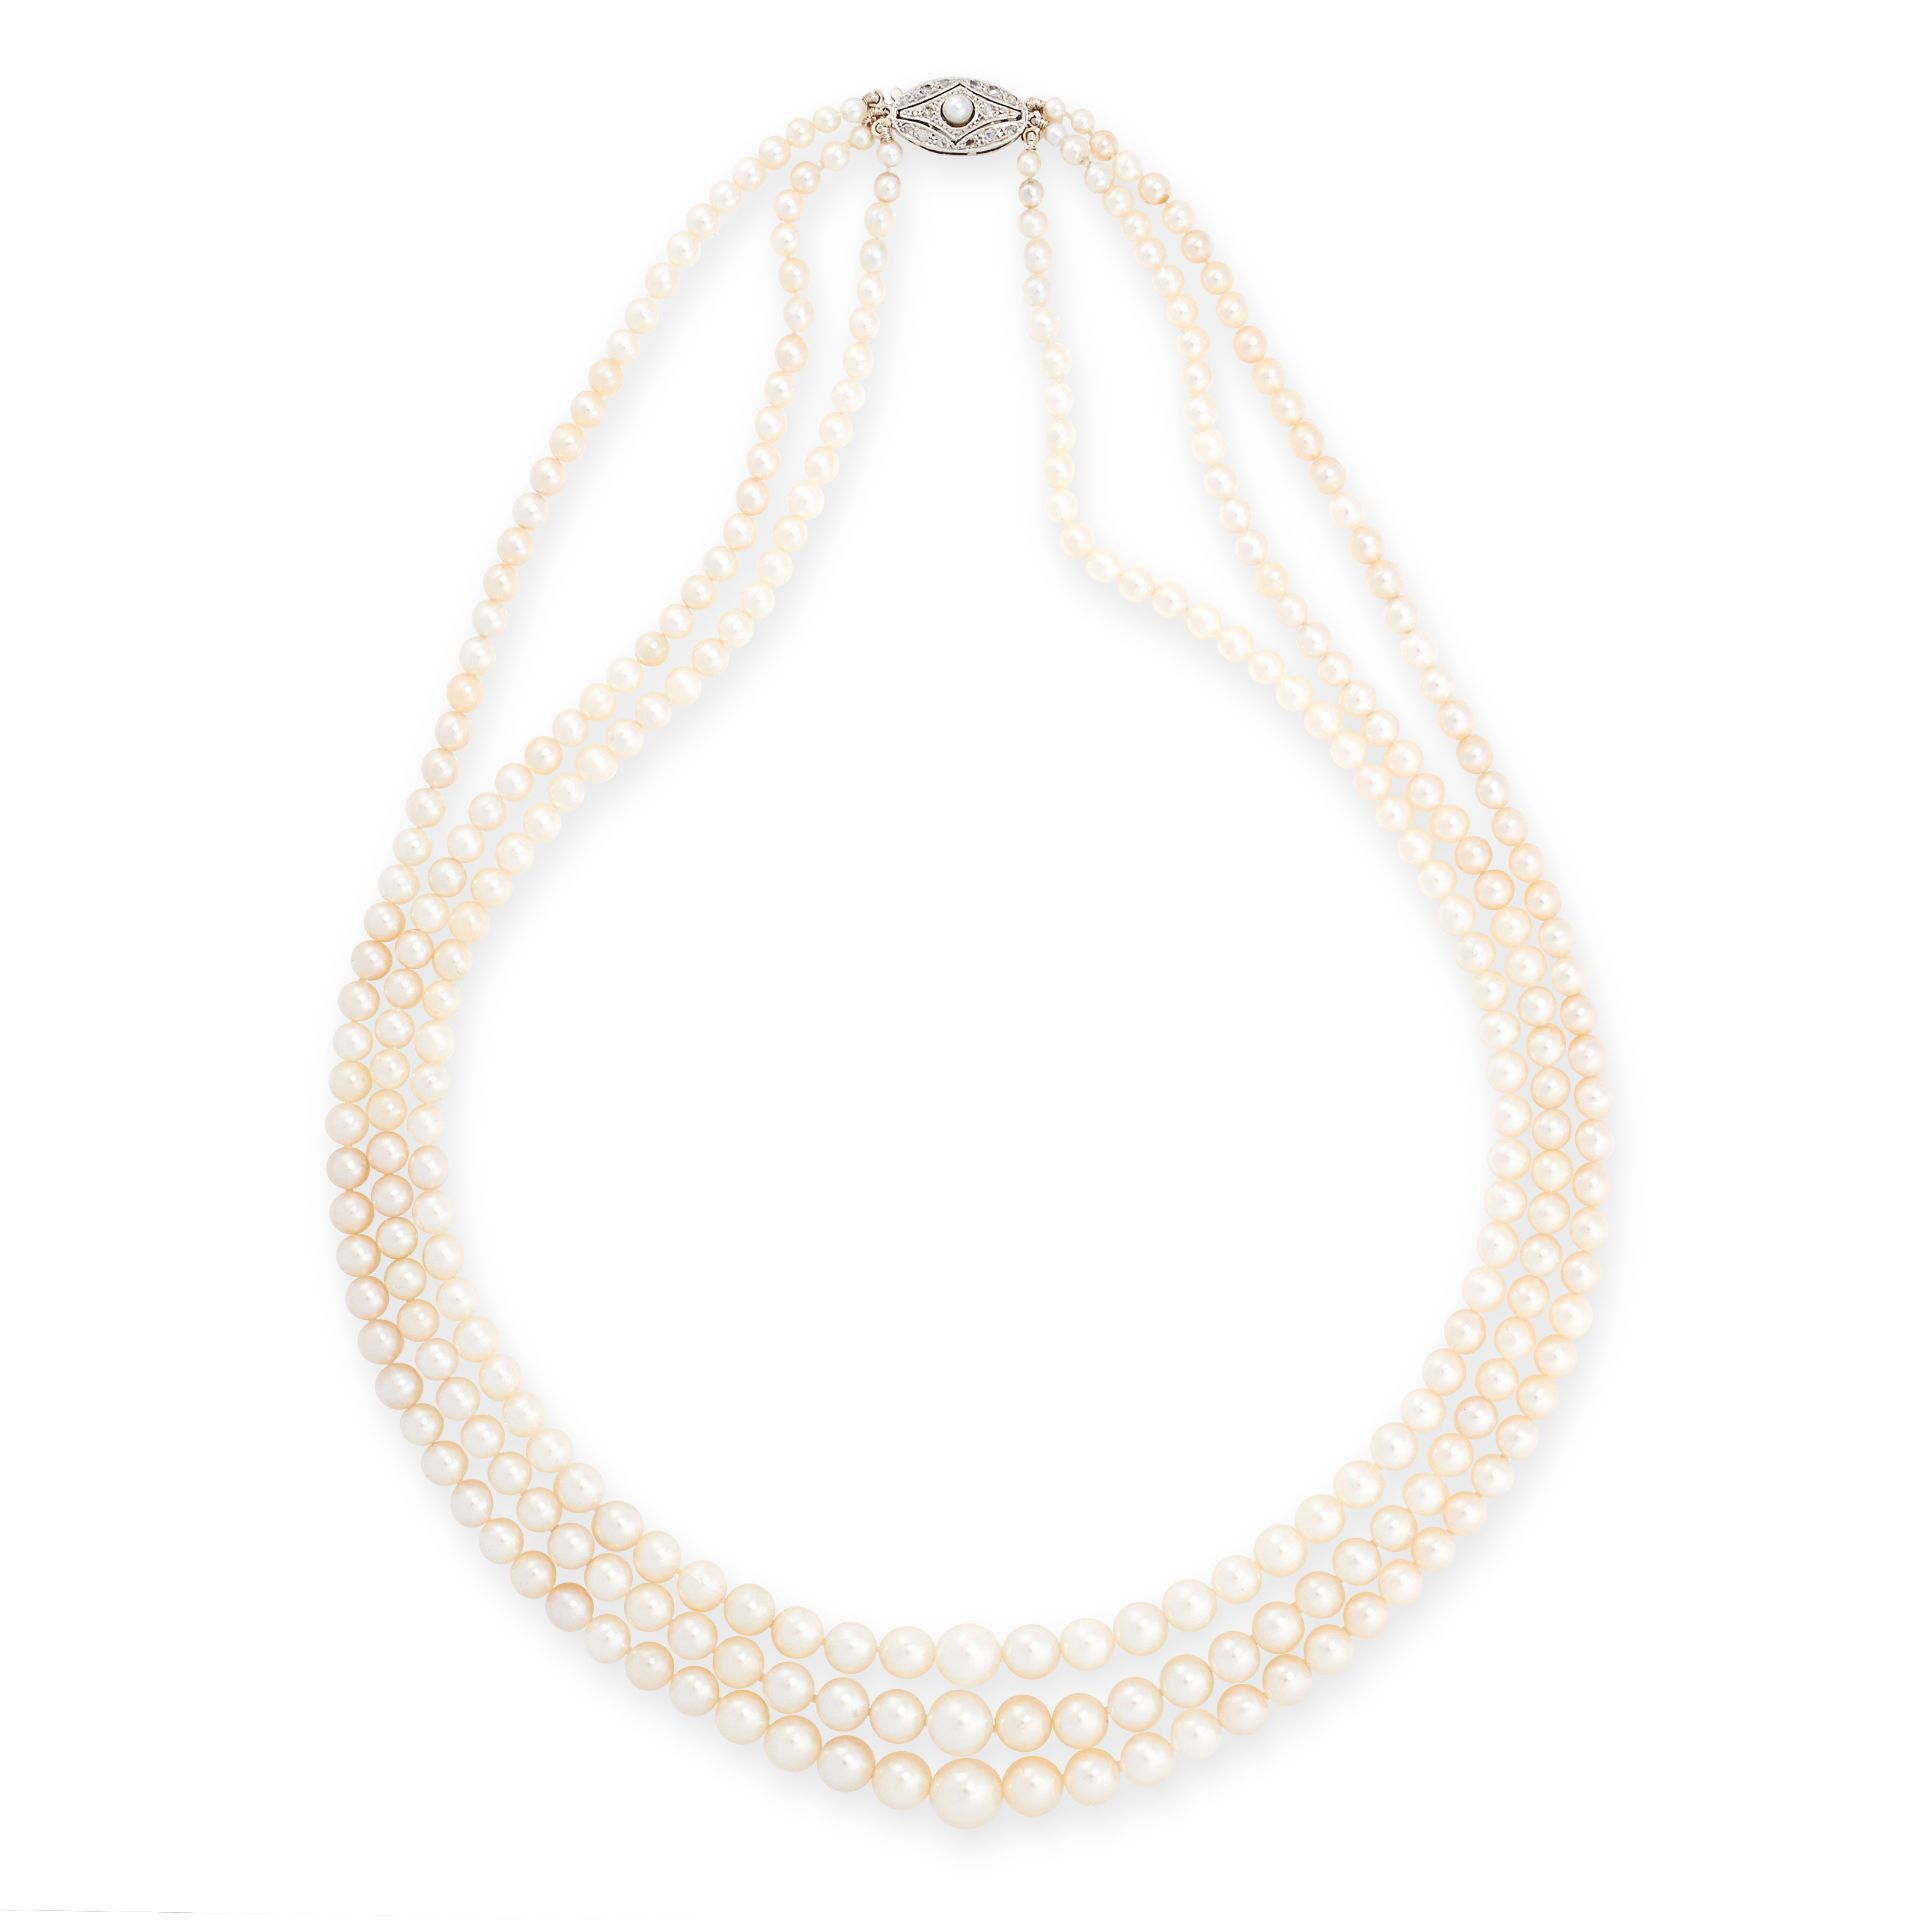 PEARL AND DIAMOND NECKLACE designed as three rows of graduated pearls measuring 2.8-7.6mm